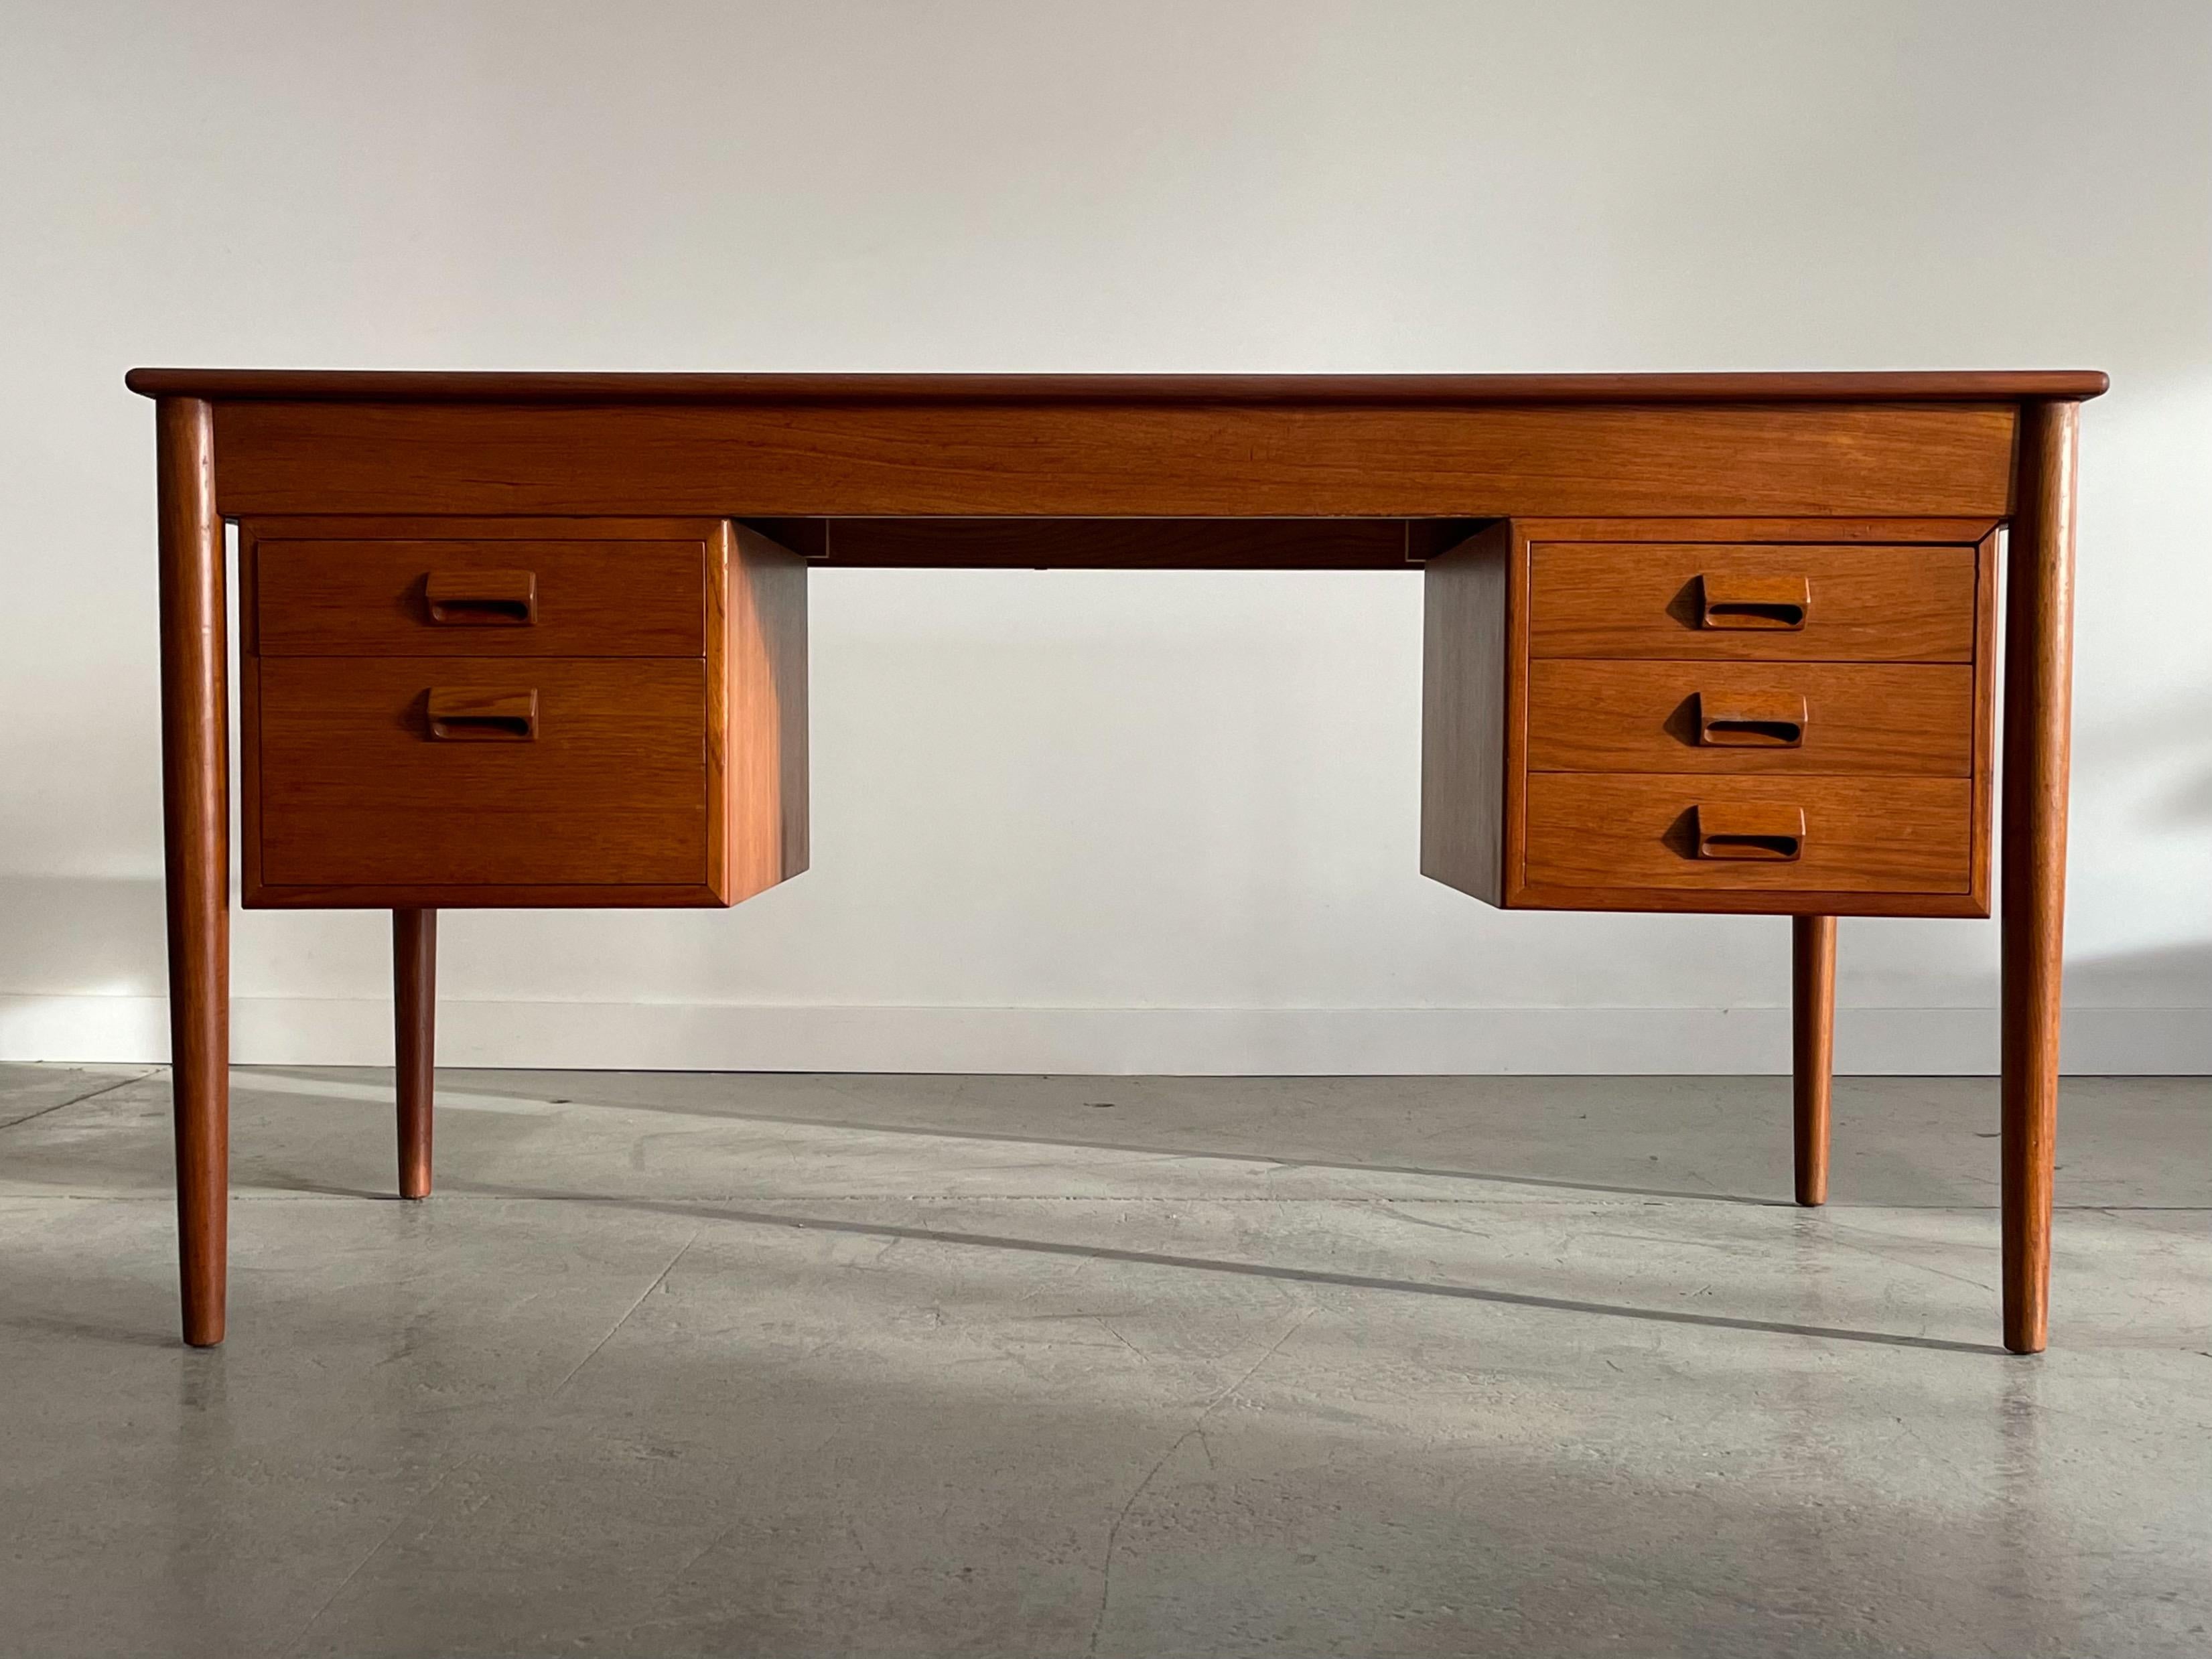 Stunning teak writing desk designed by Borge Mogensen for Soborg Mobler. This piece features a simple, yet elegant design characteristic of Mogensen furniture. Also typical of Mogensen's work is premium construction considered detailing throughout.